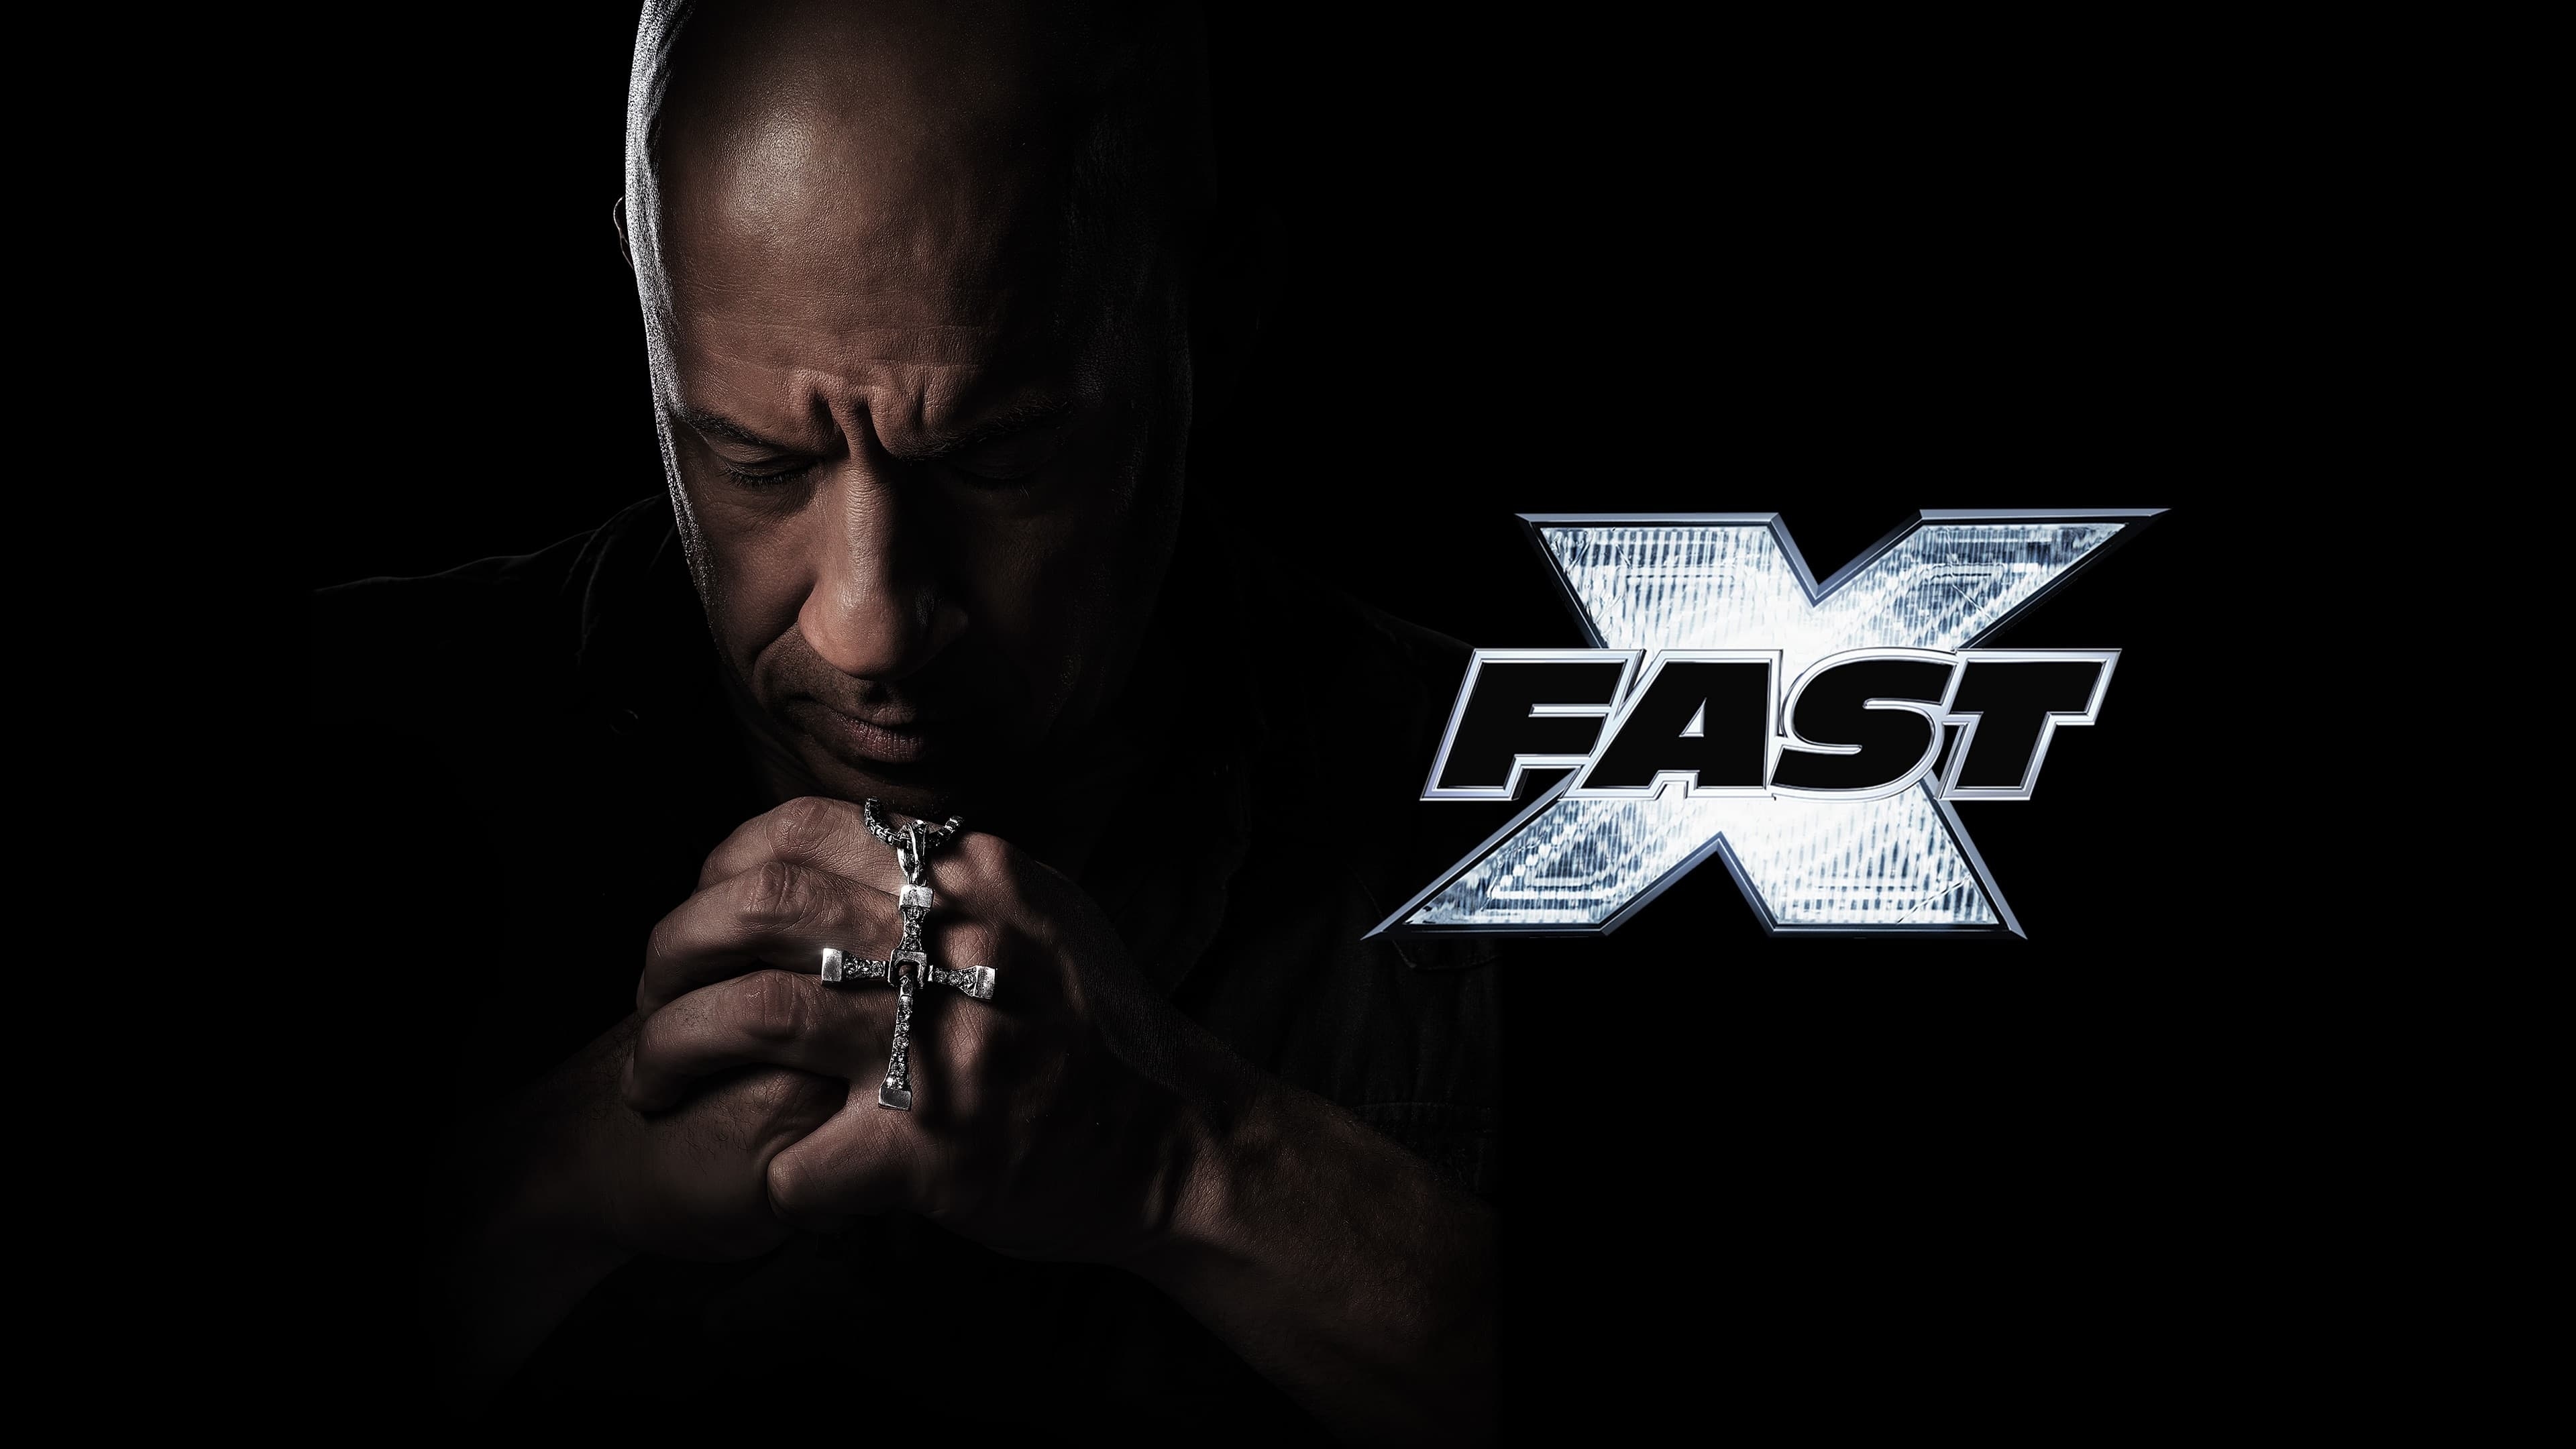 HD wallpaper, 2023 Movies, Amoled, Black Background, Fast X, Vin Diesel As Dominic Toretto